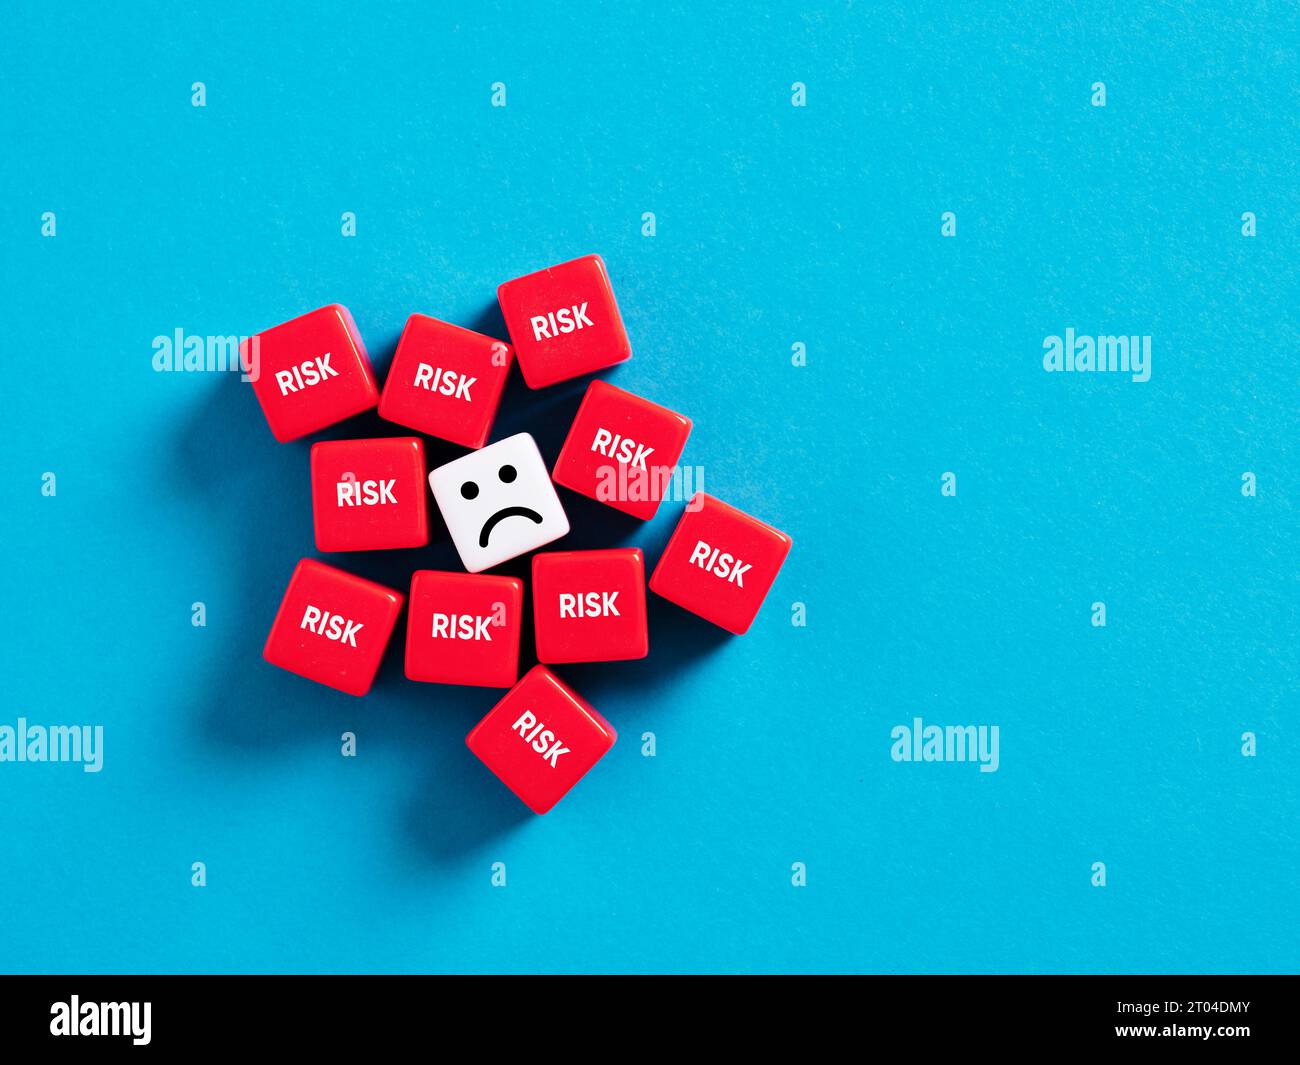 Extreme risk taking, stress and frustration. Too many risk factors. Risky business environment. Unhappy face surrounded with cubes with the word risk. Stock Photo